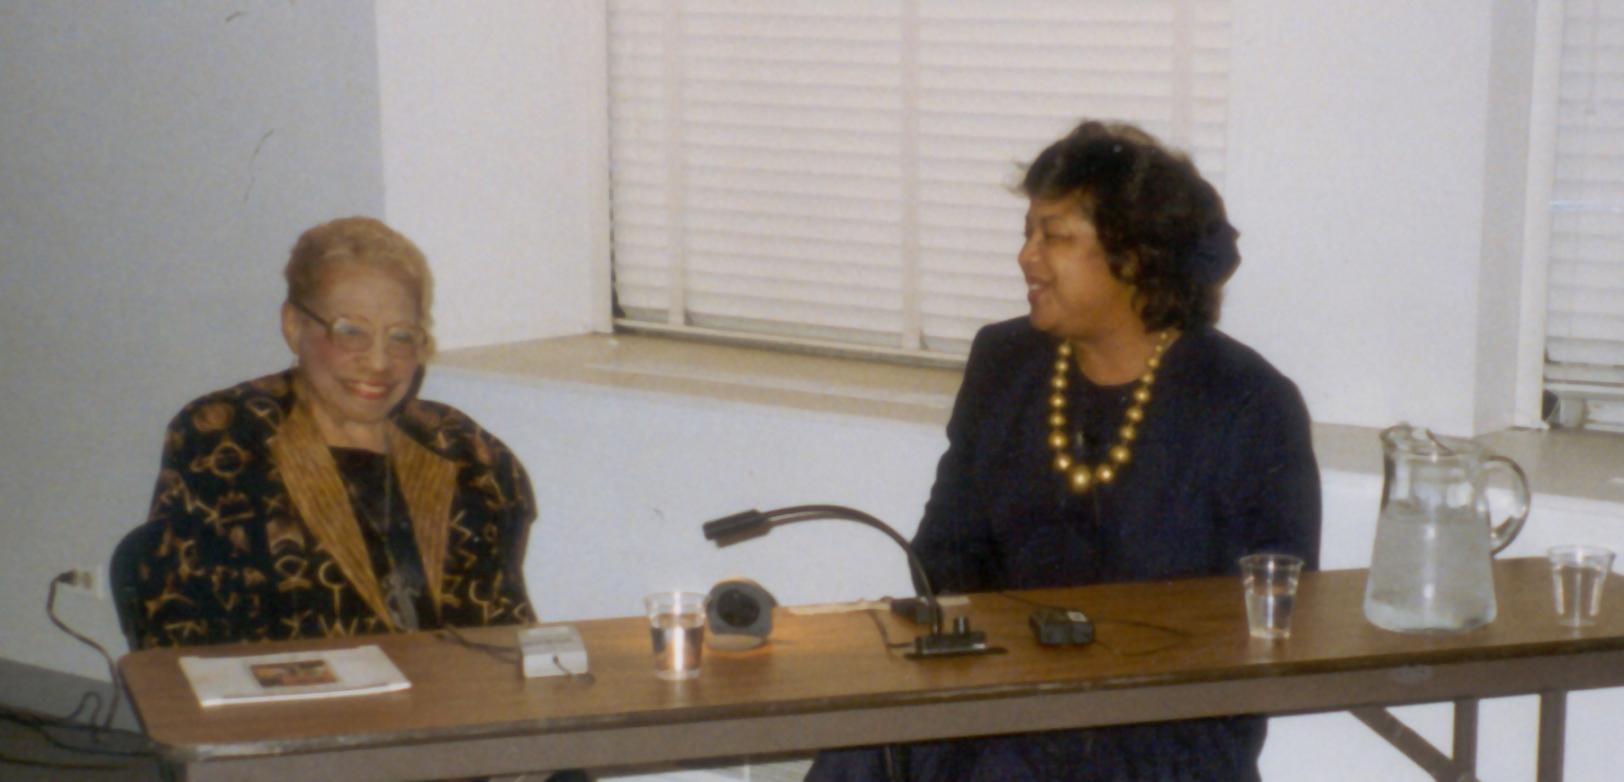 Two women sitting together at a brown table.